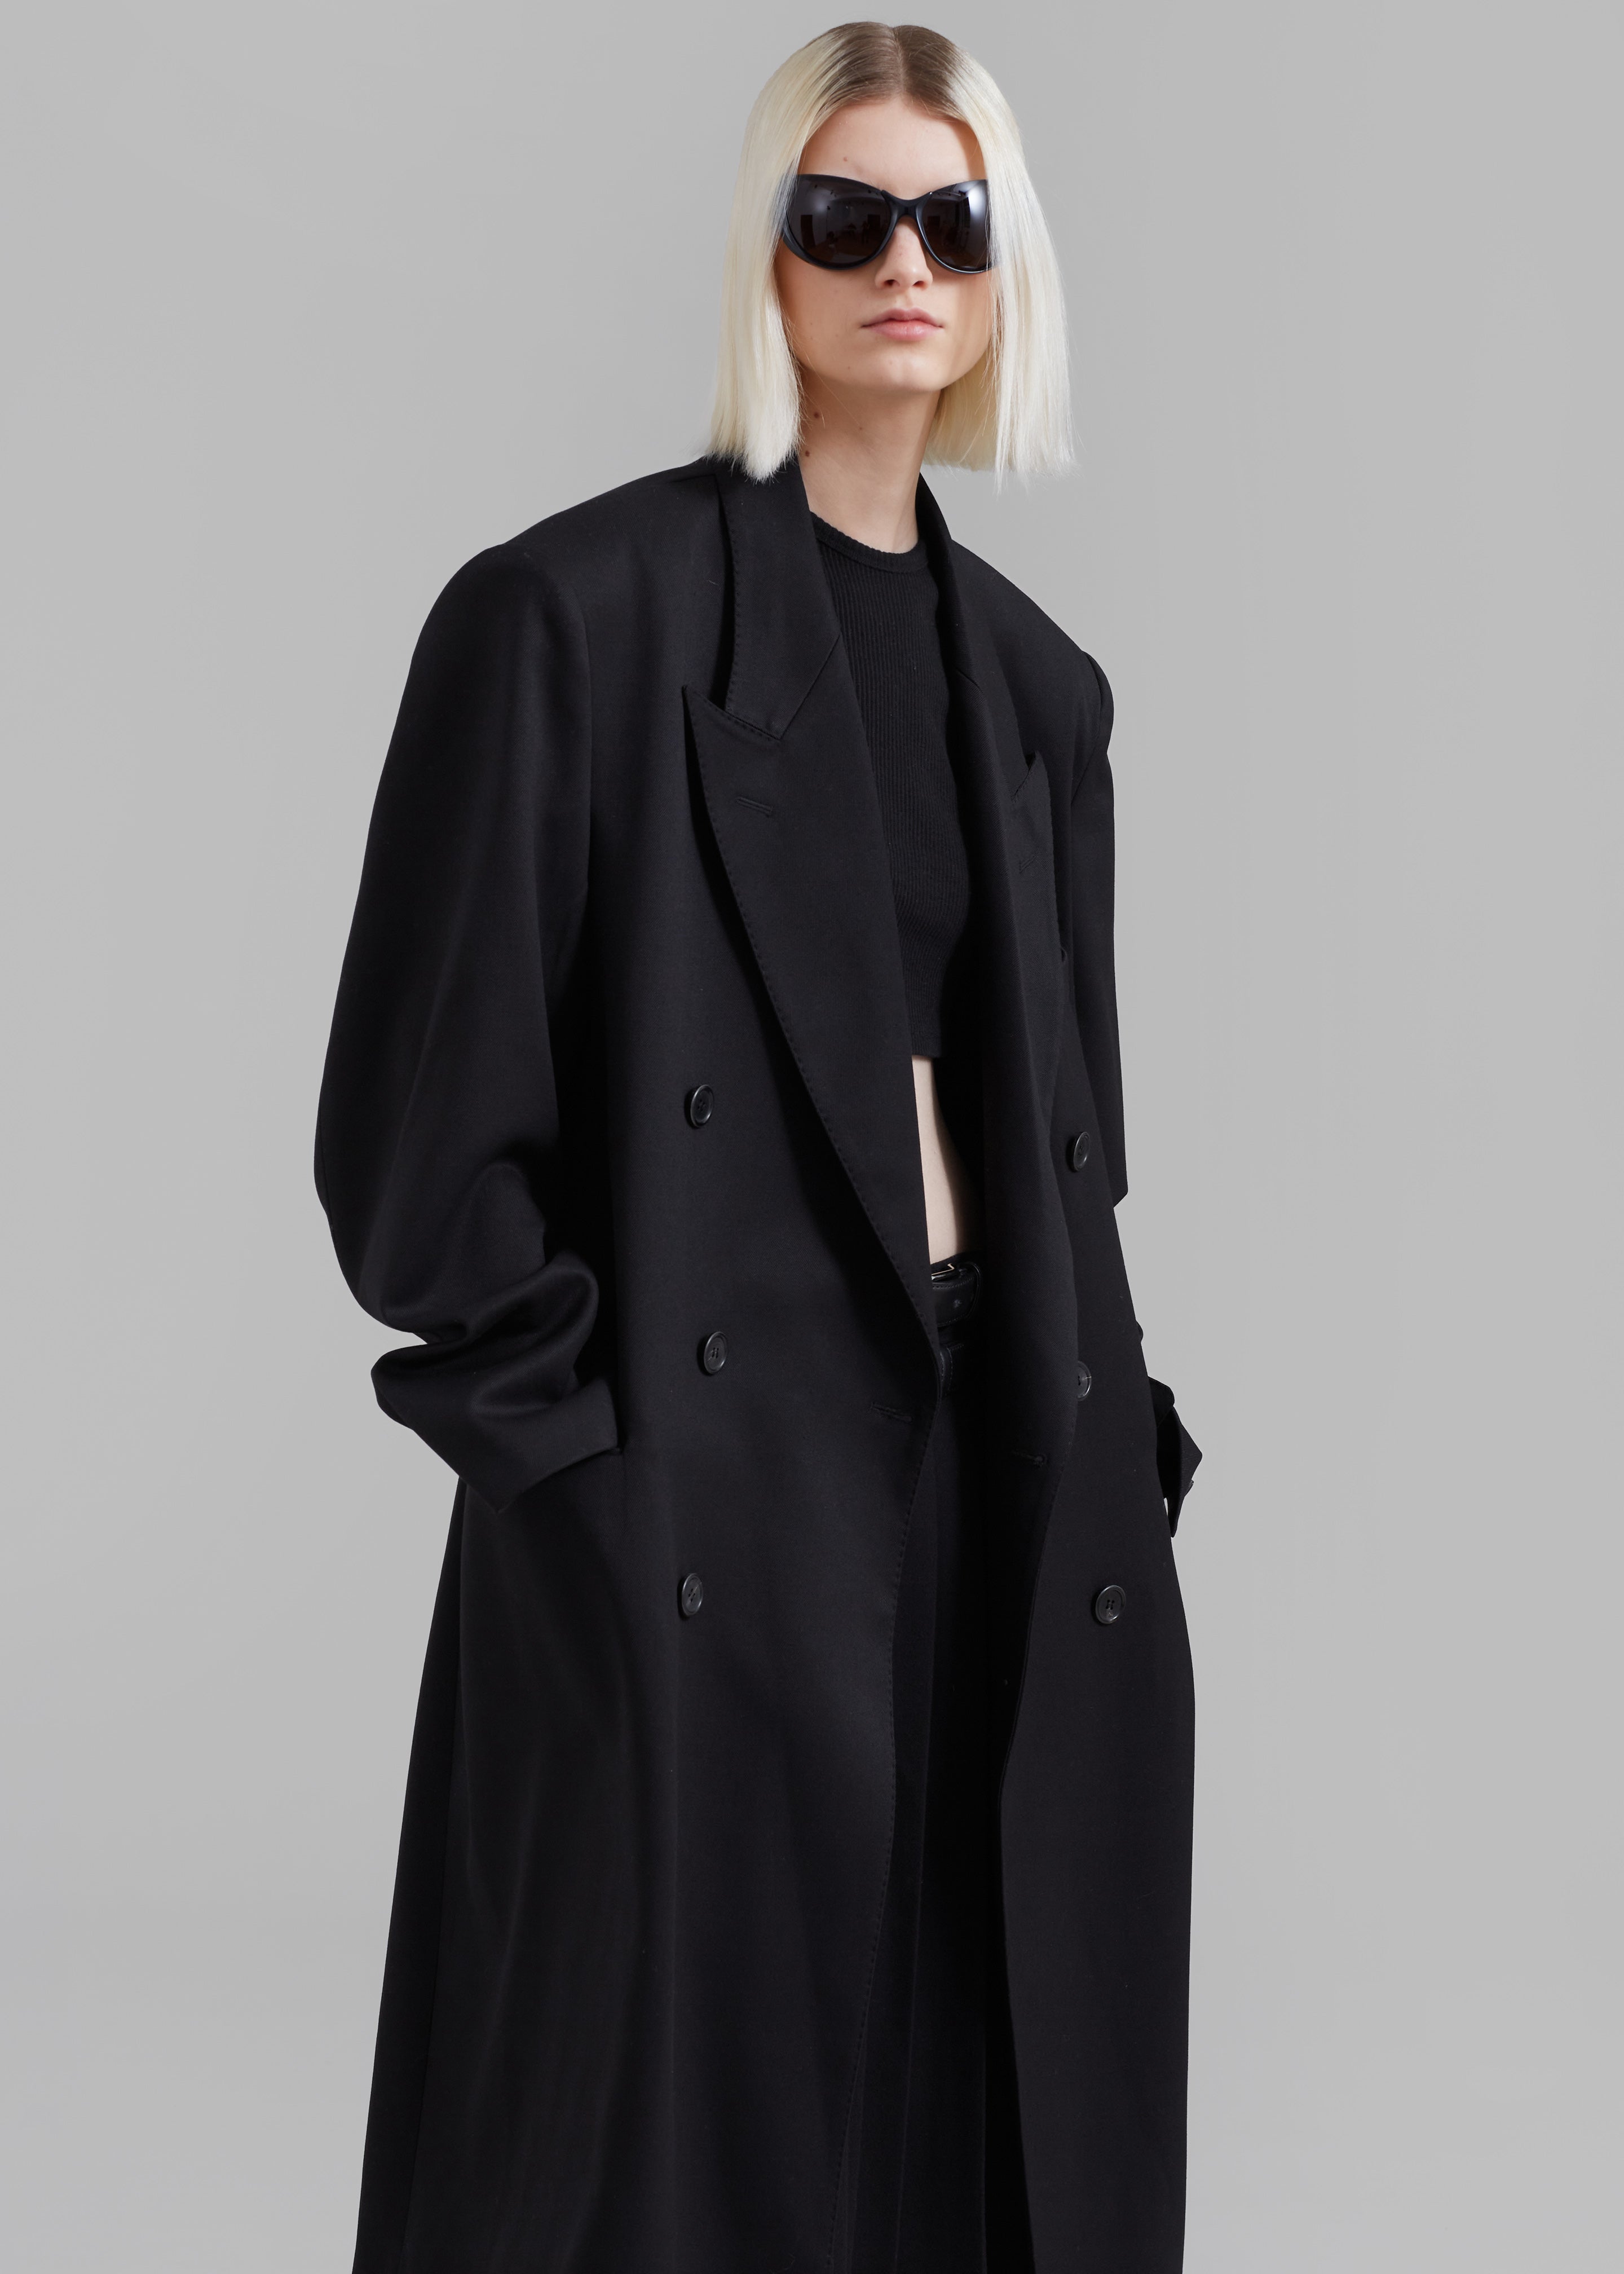 Off To London Convertible Coat - Black